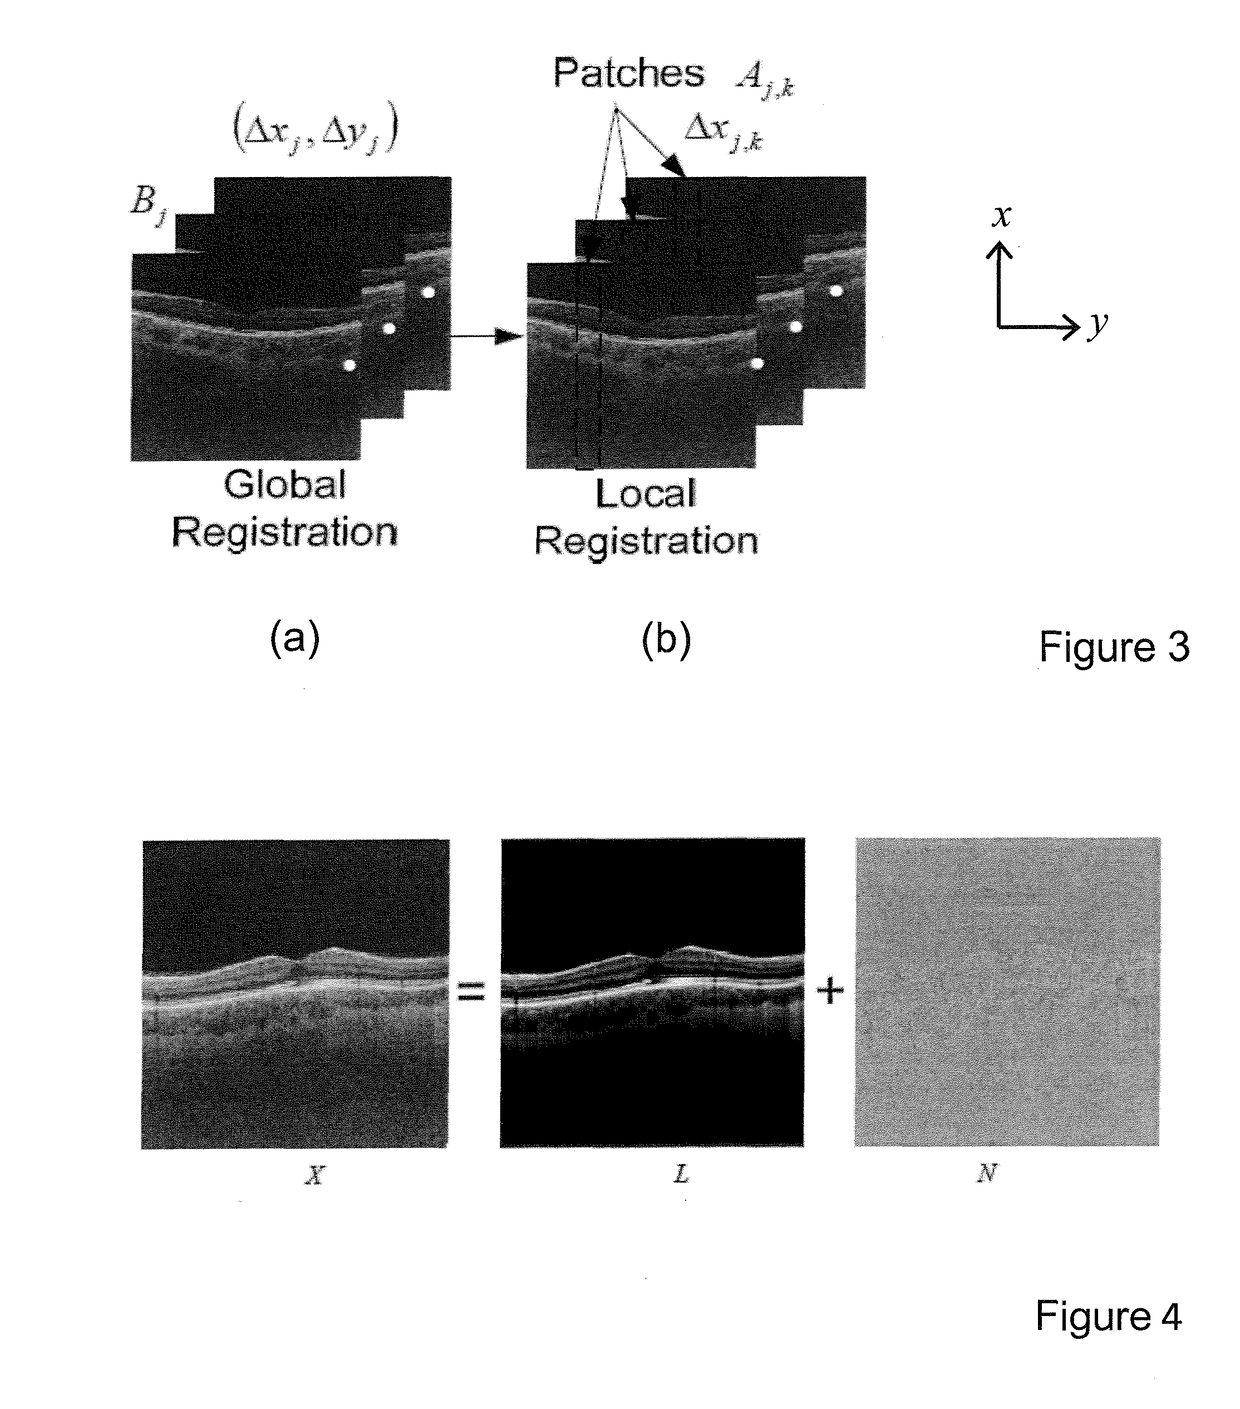 Reducing speckle noise in optical coherence tomography images